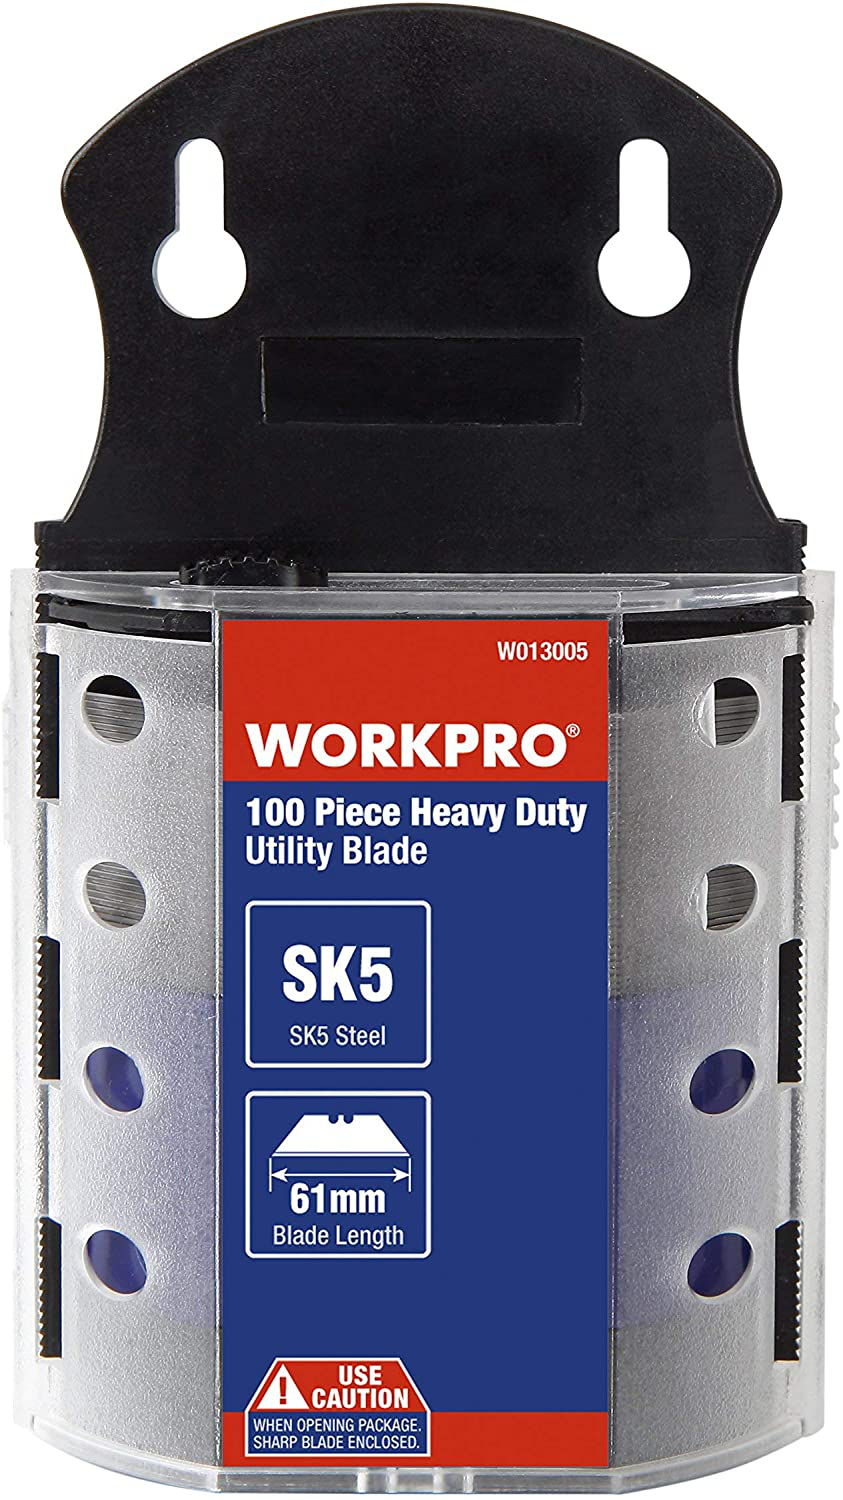 WORKPRO Utility Knife Blades, SK5 Steel, 100-pack with Dispenser